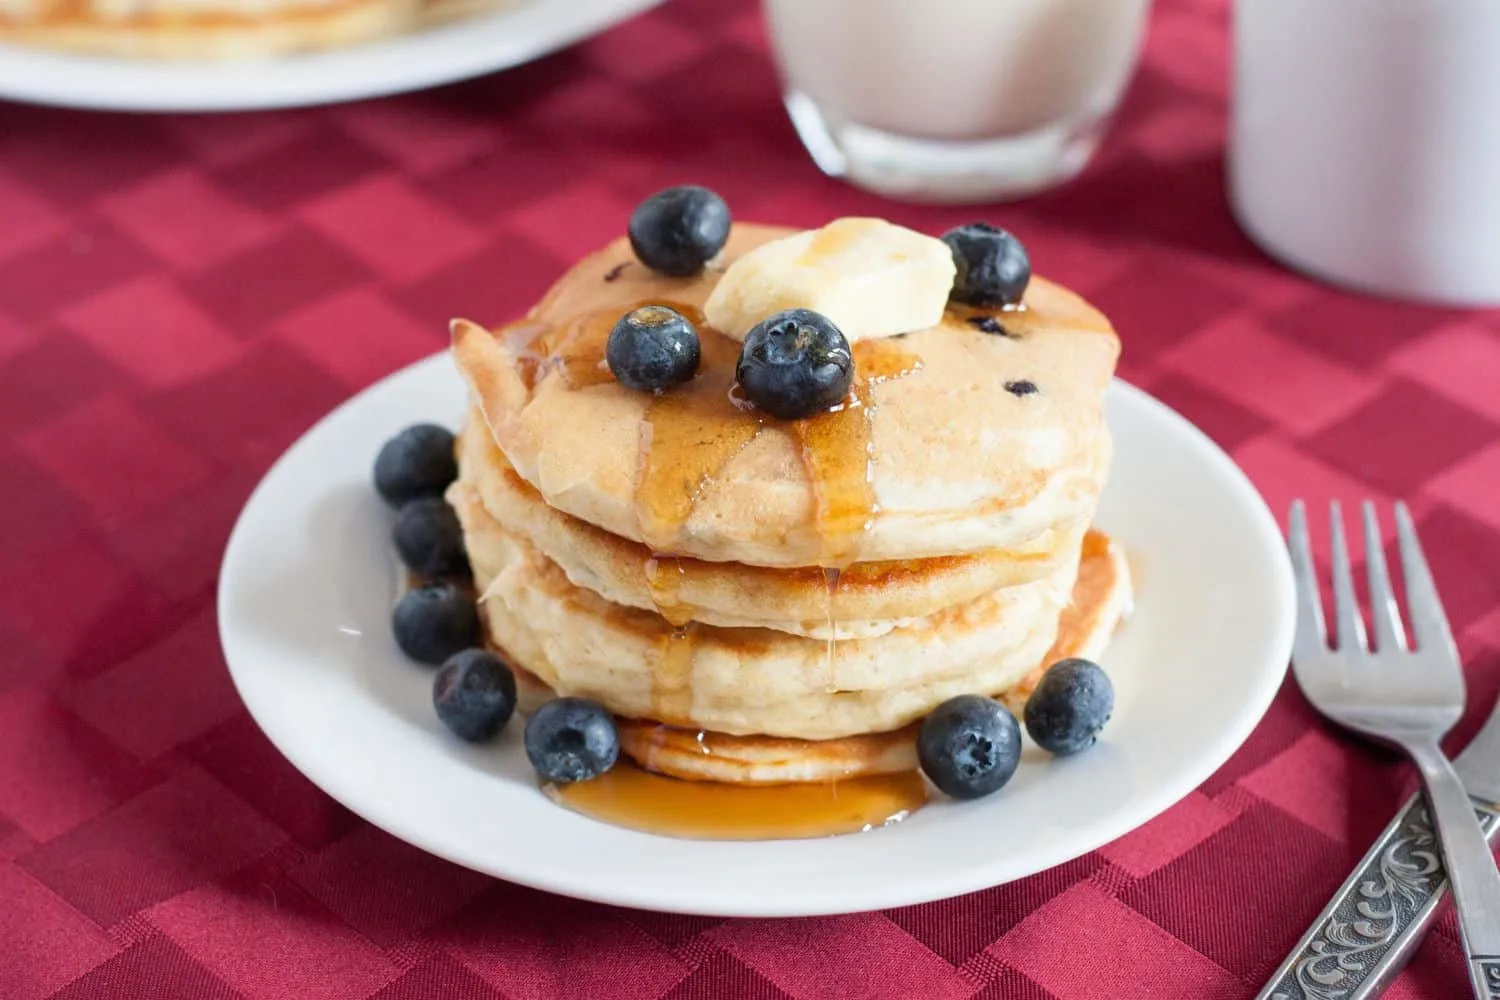 Make fluffy blueberry pancakes a little healthier by adding golden flax. Kid and husband approved! Recipe on GoodieGodmother.com